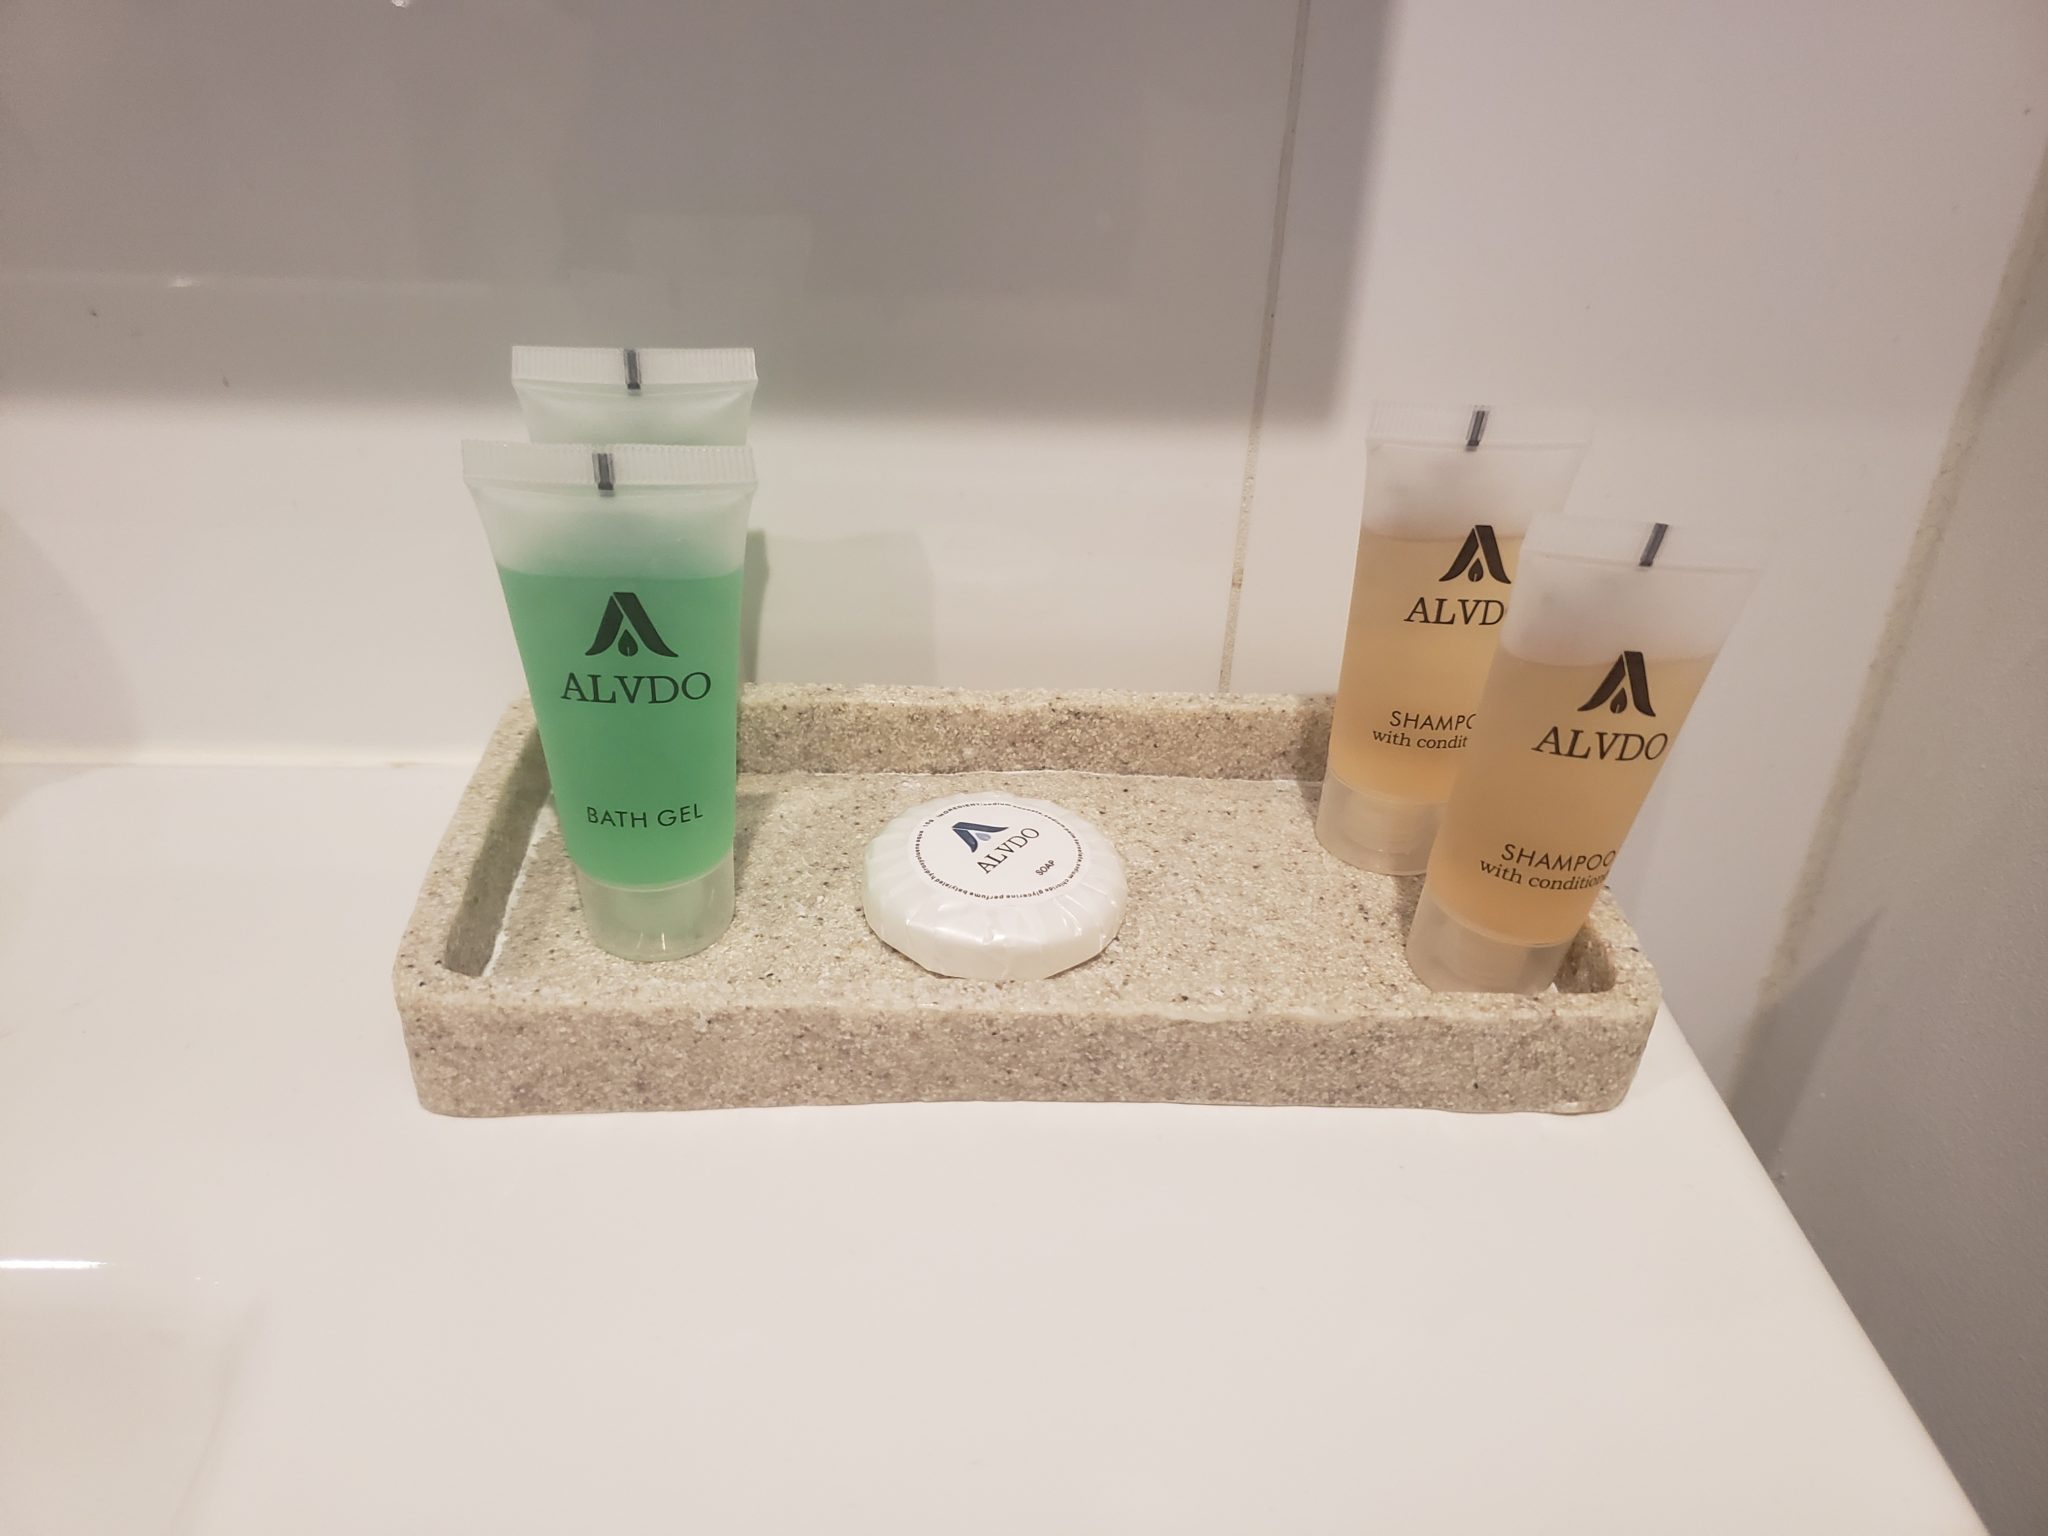 a group of small bottles of shampoo and soap on a tray